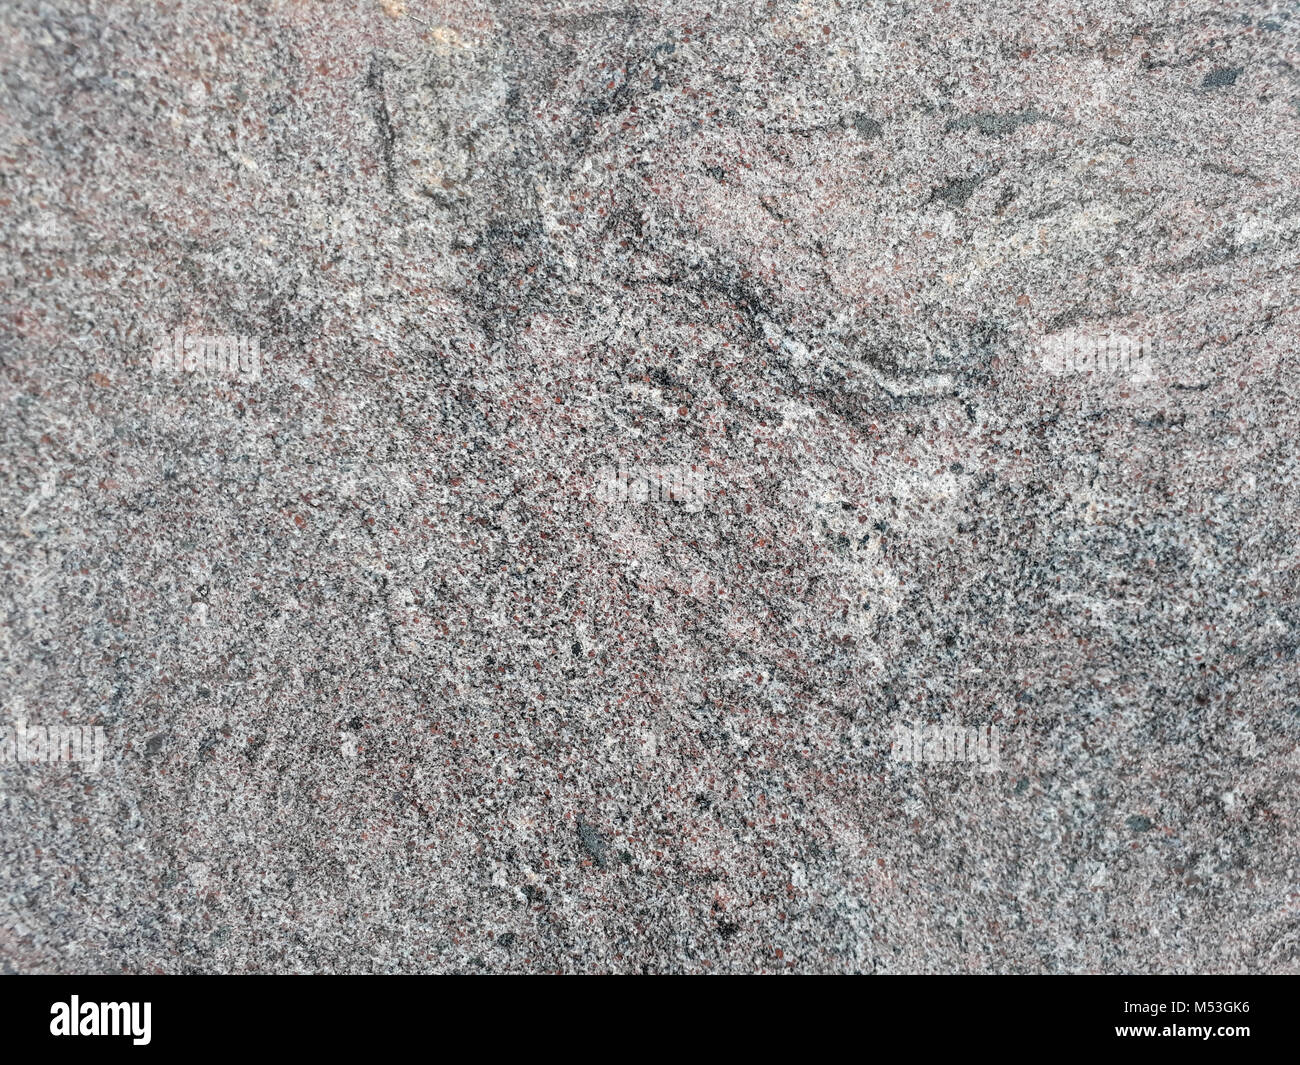 Grey granite with veins texture, may be used as background Stock Photo